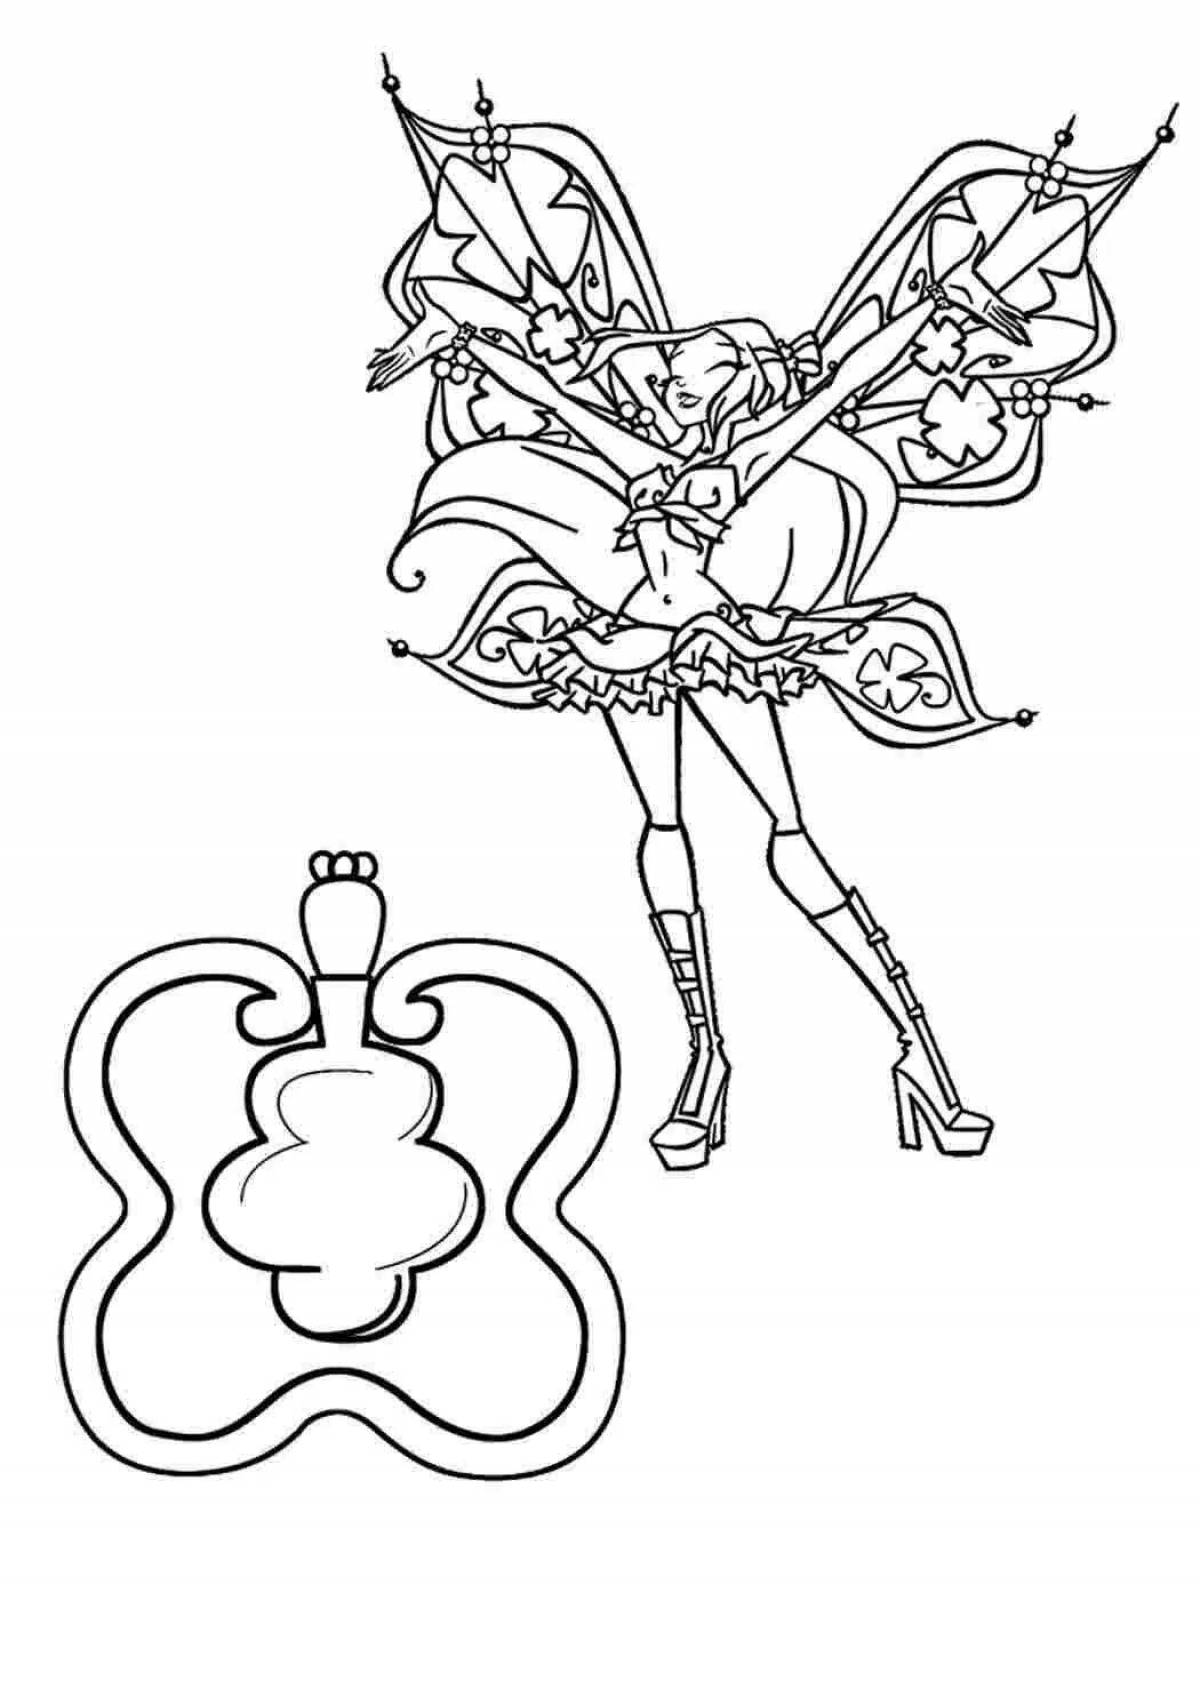 Enchantix bloom coloring page of charm